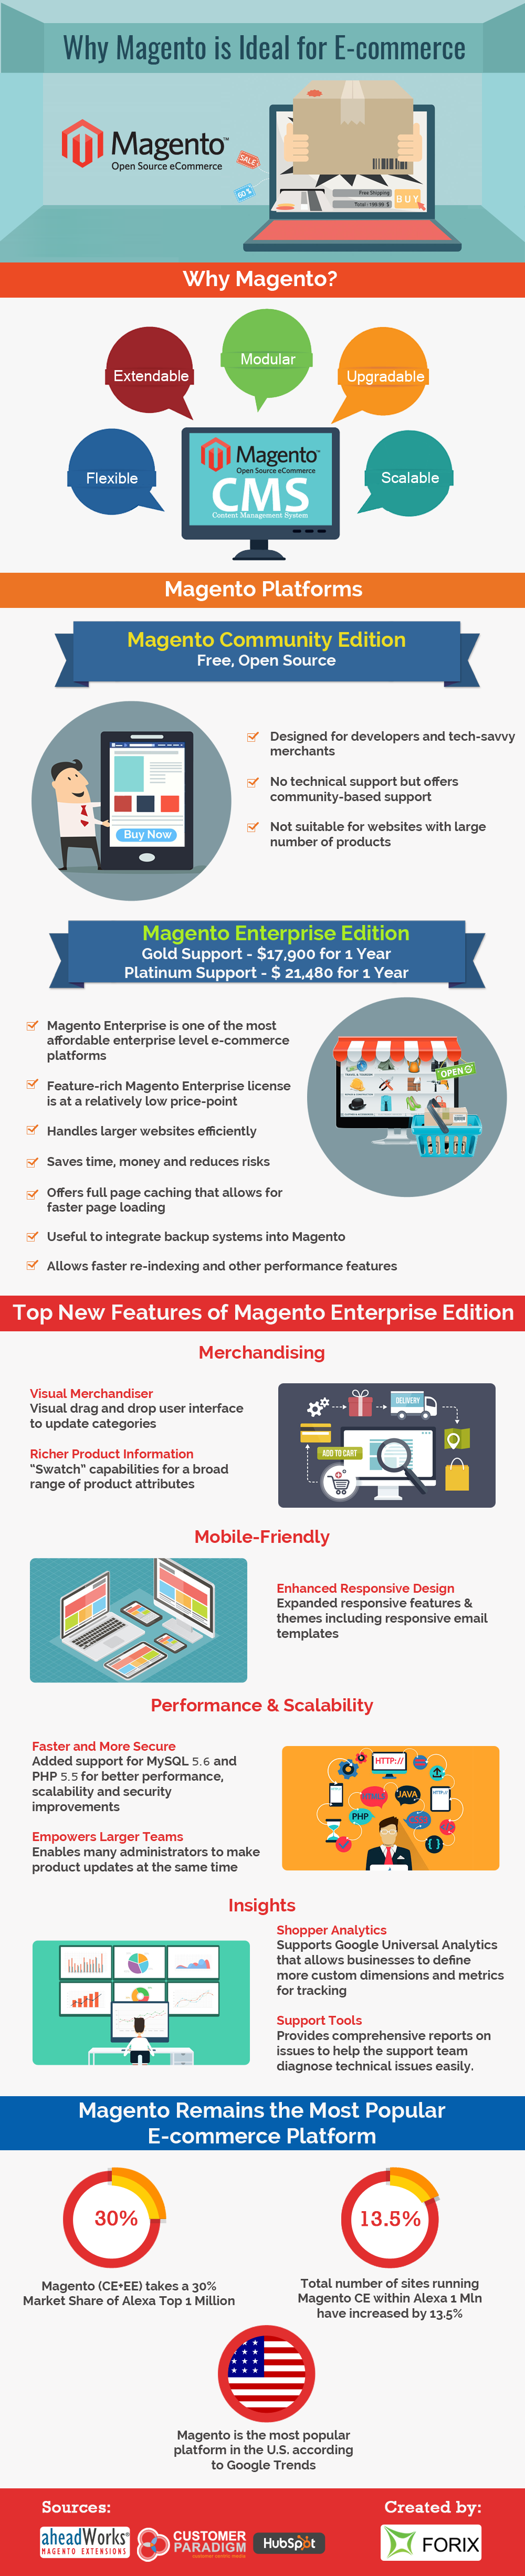 Magento Top New Features